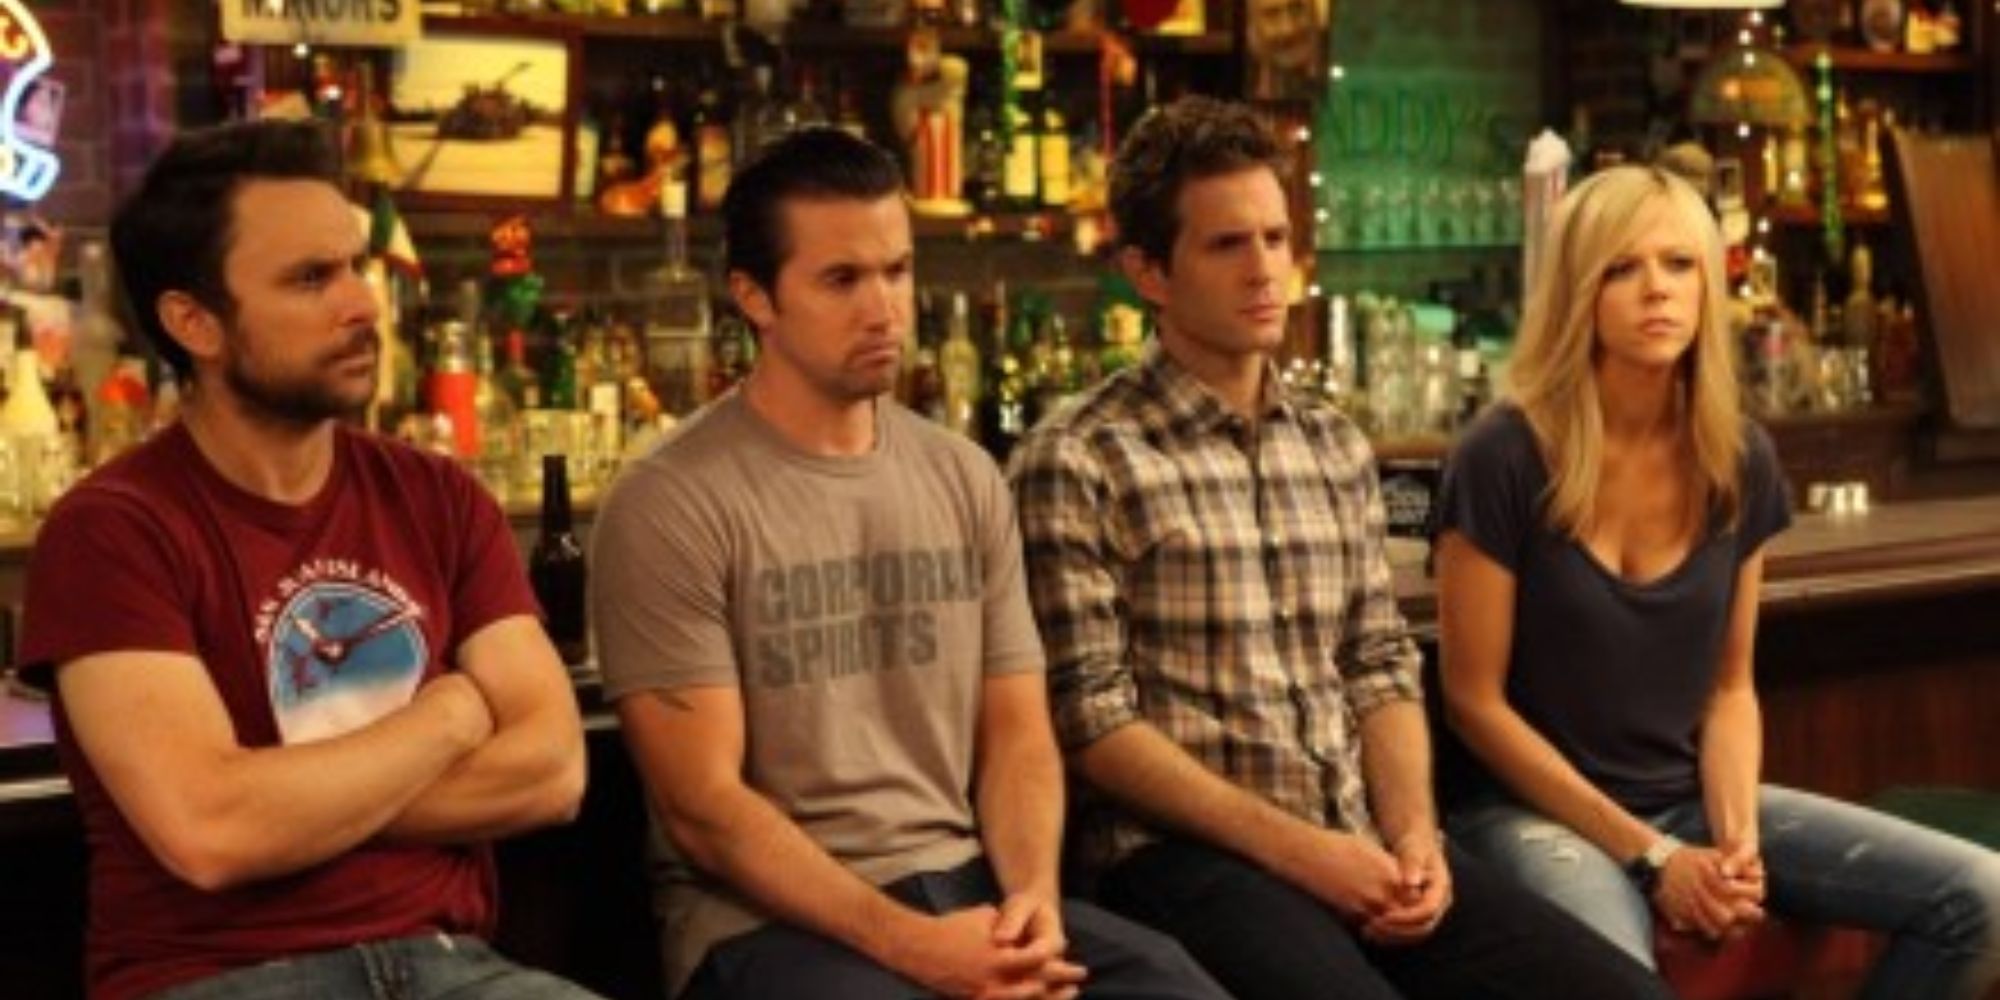 Four friends from It's Always Sunny in Philadelphia sitting on barstools in the bar, looking despondent.